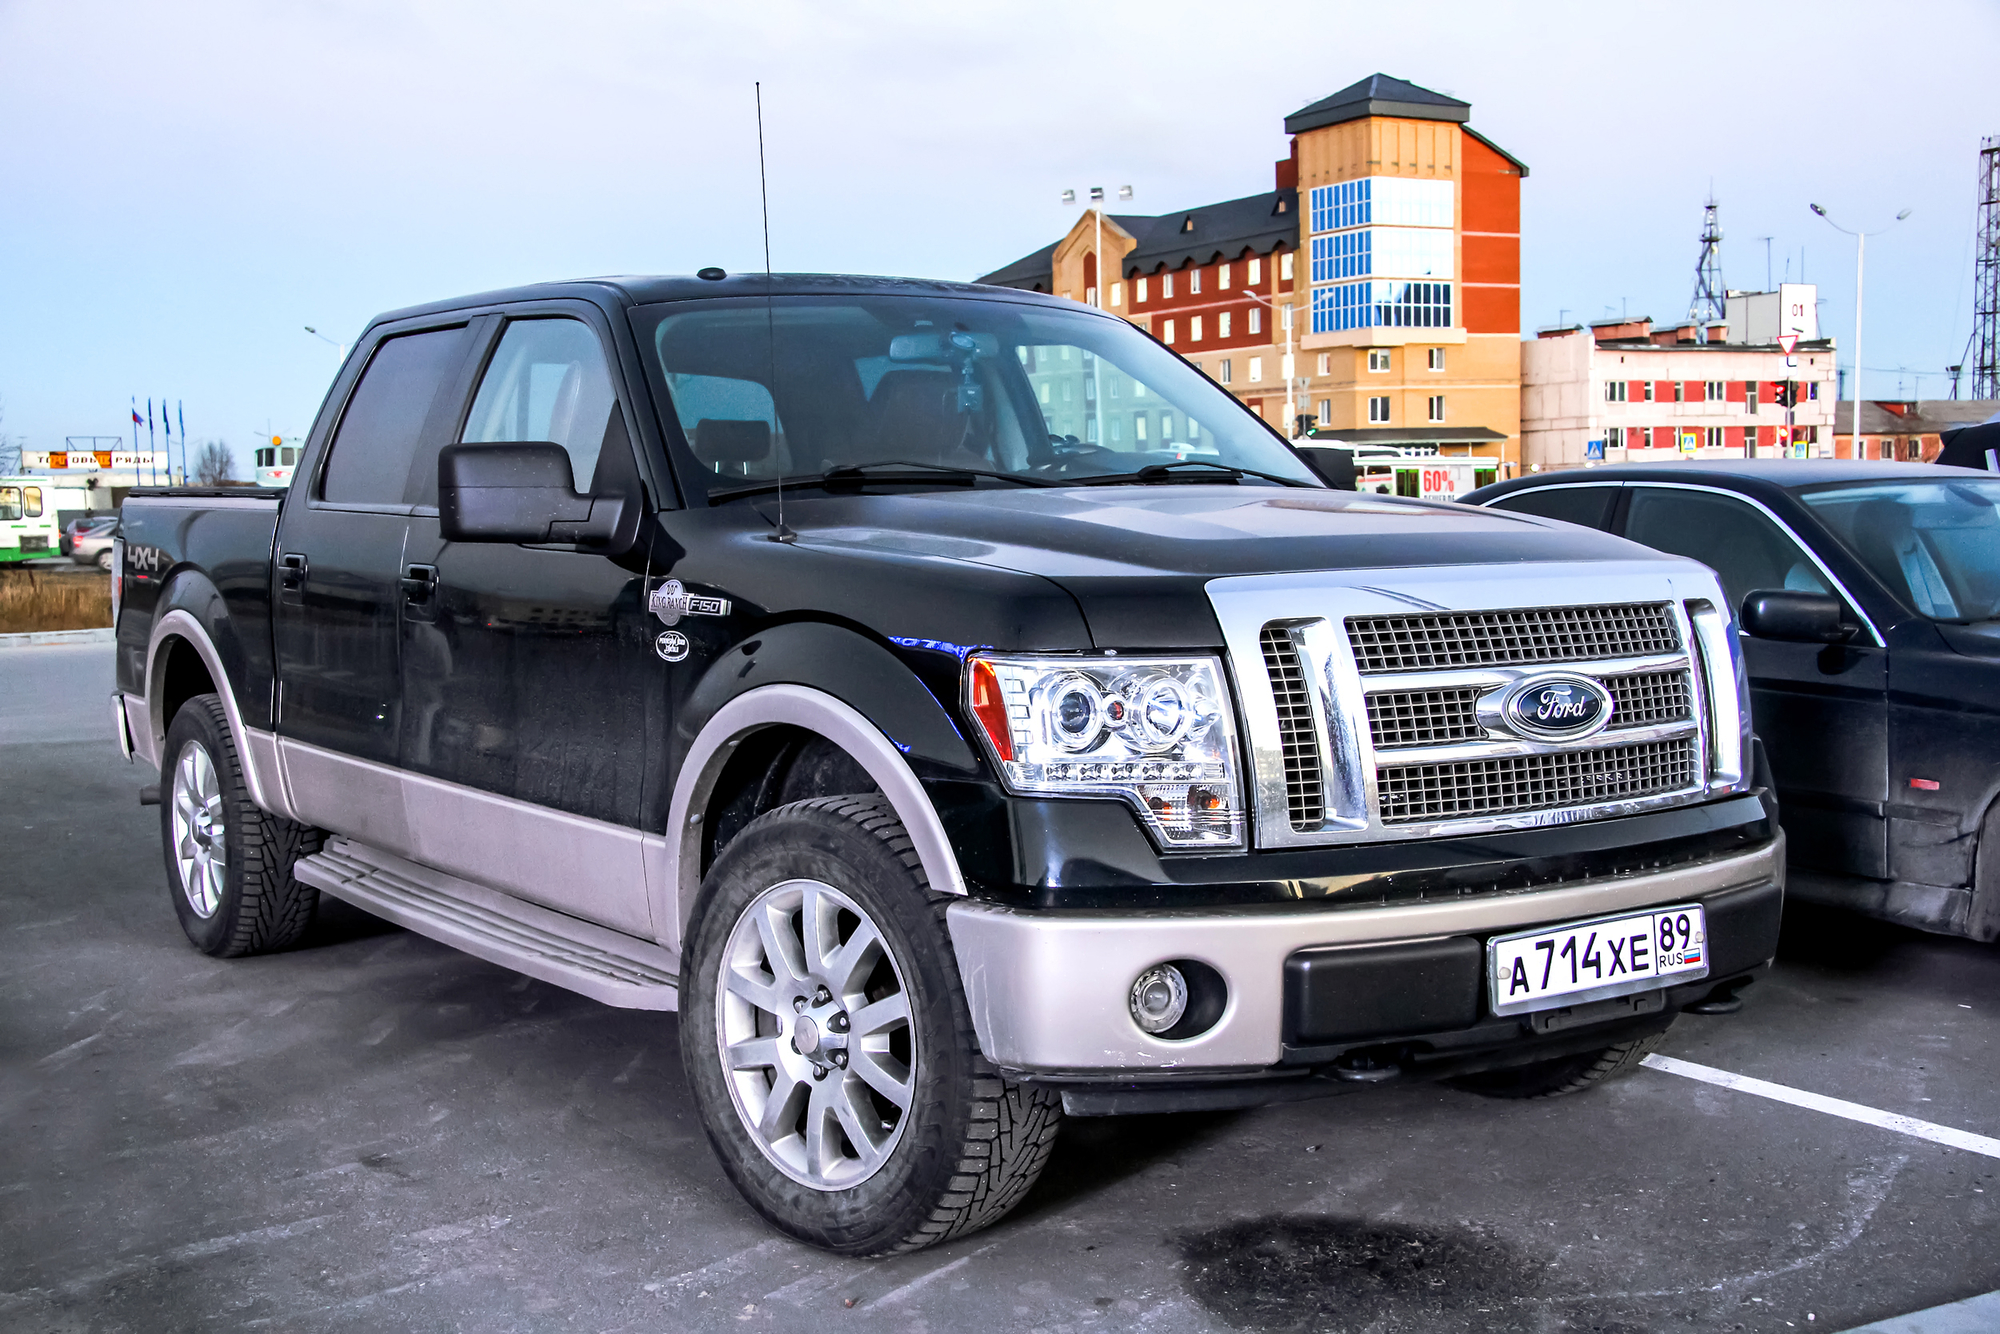 How to Start a Ford F-150 Without Keys